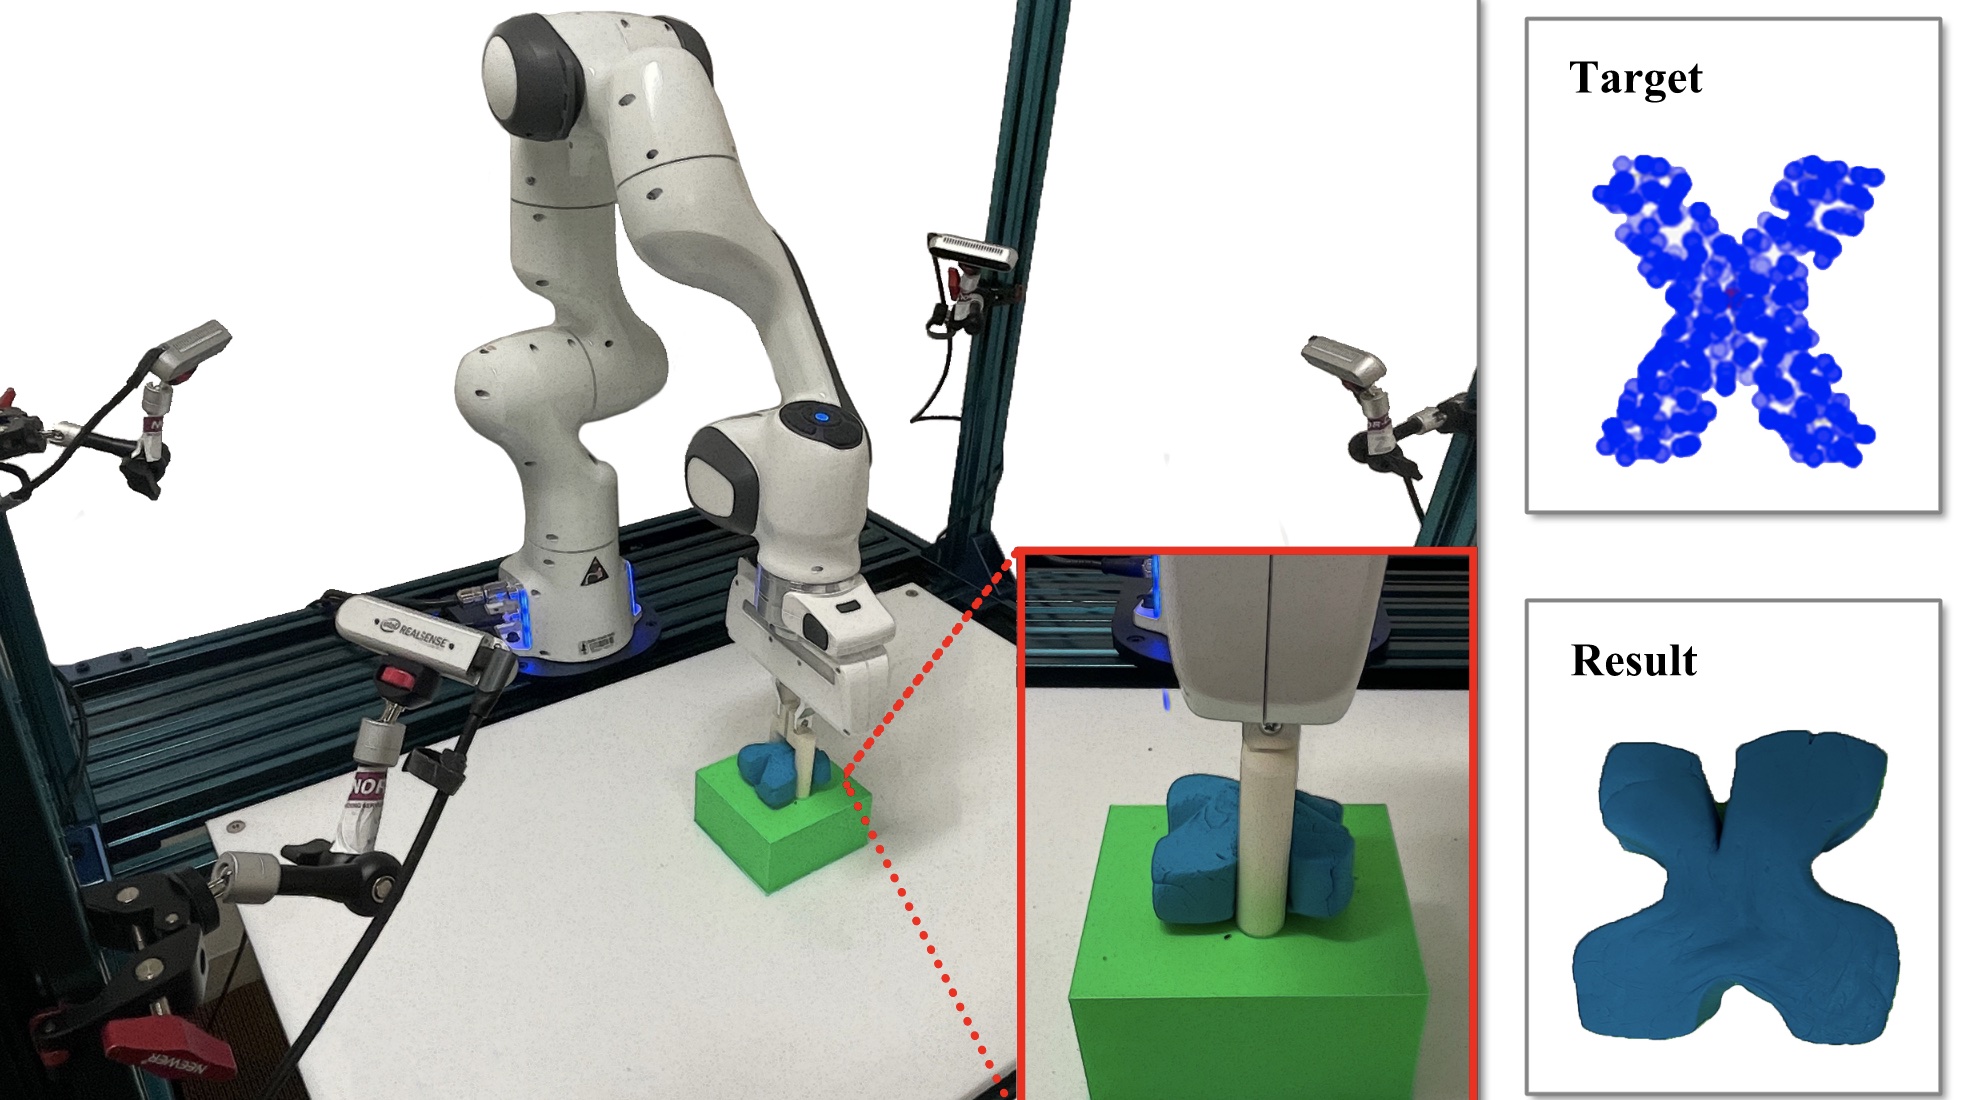 Coching Teacher Student Fingring Vidio - Robots play with play dough | MIT News | Massachusetts Institute of  Technology